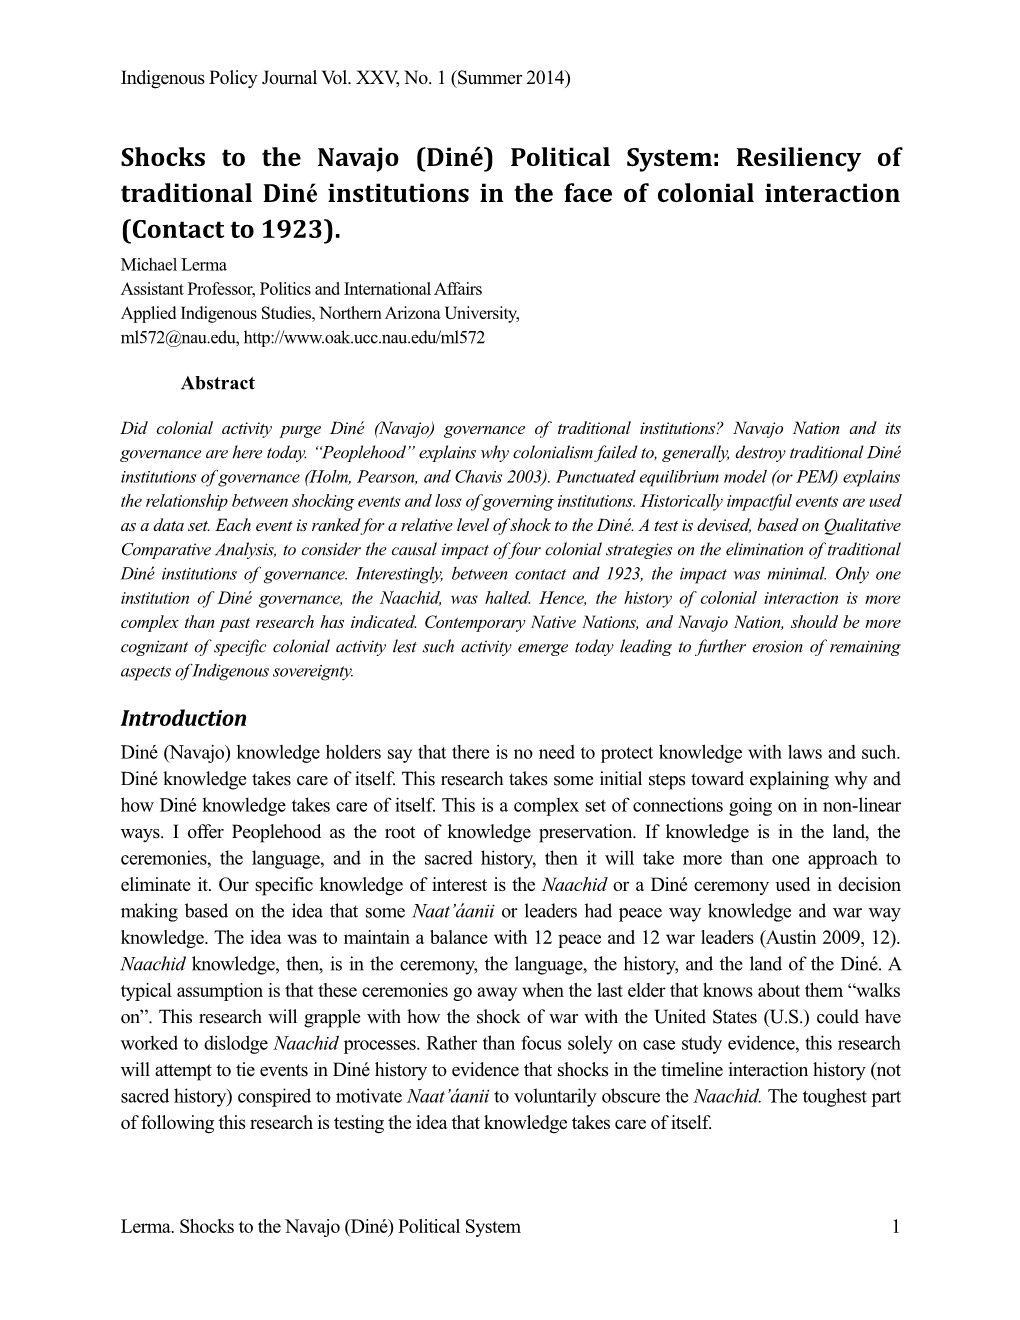 Diné) Political System: Resiliency of Traditional Din4 Institutions in the Face of Colonial Interaction (Contact to 1923)